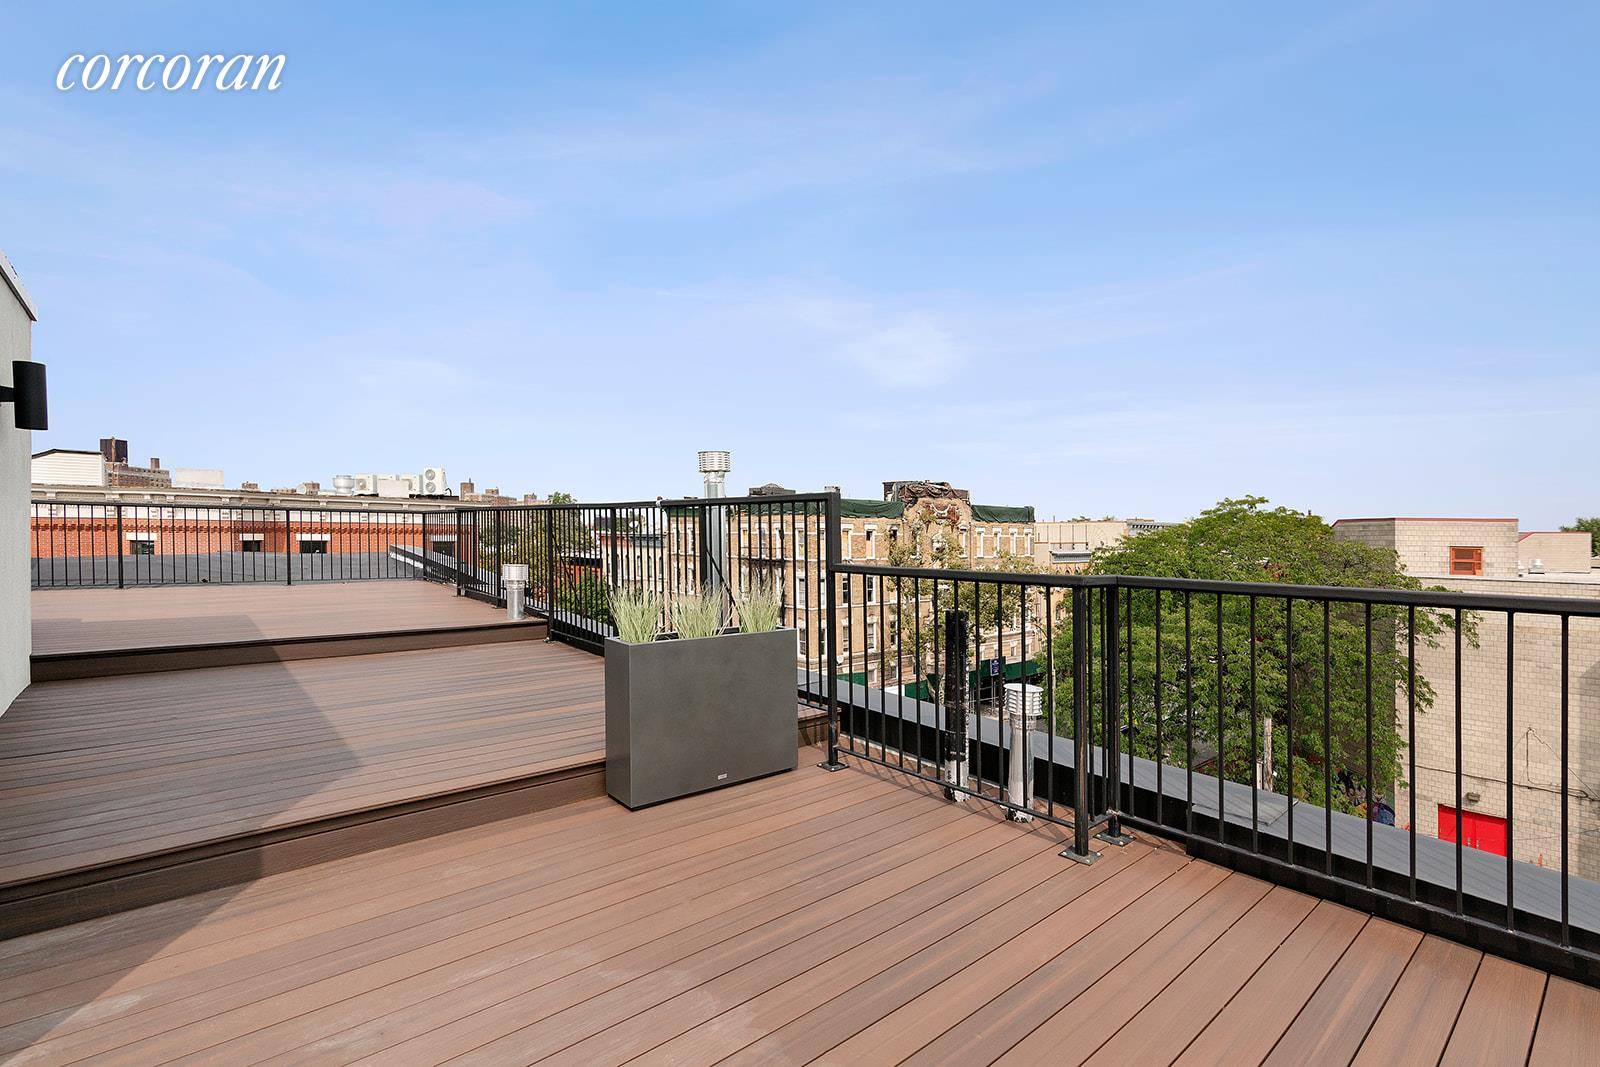 Residence 3 at The Q Condos is a 920 sq ft floor through unit with a 442 sq ft roof terrace.